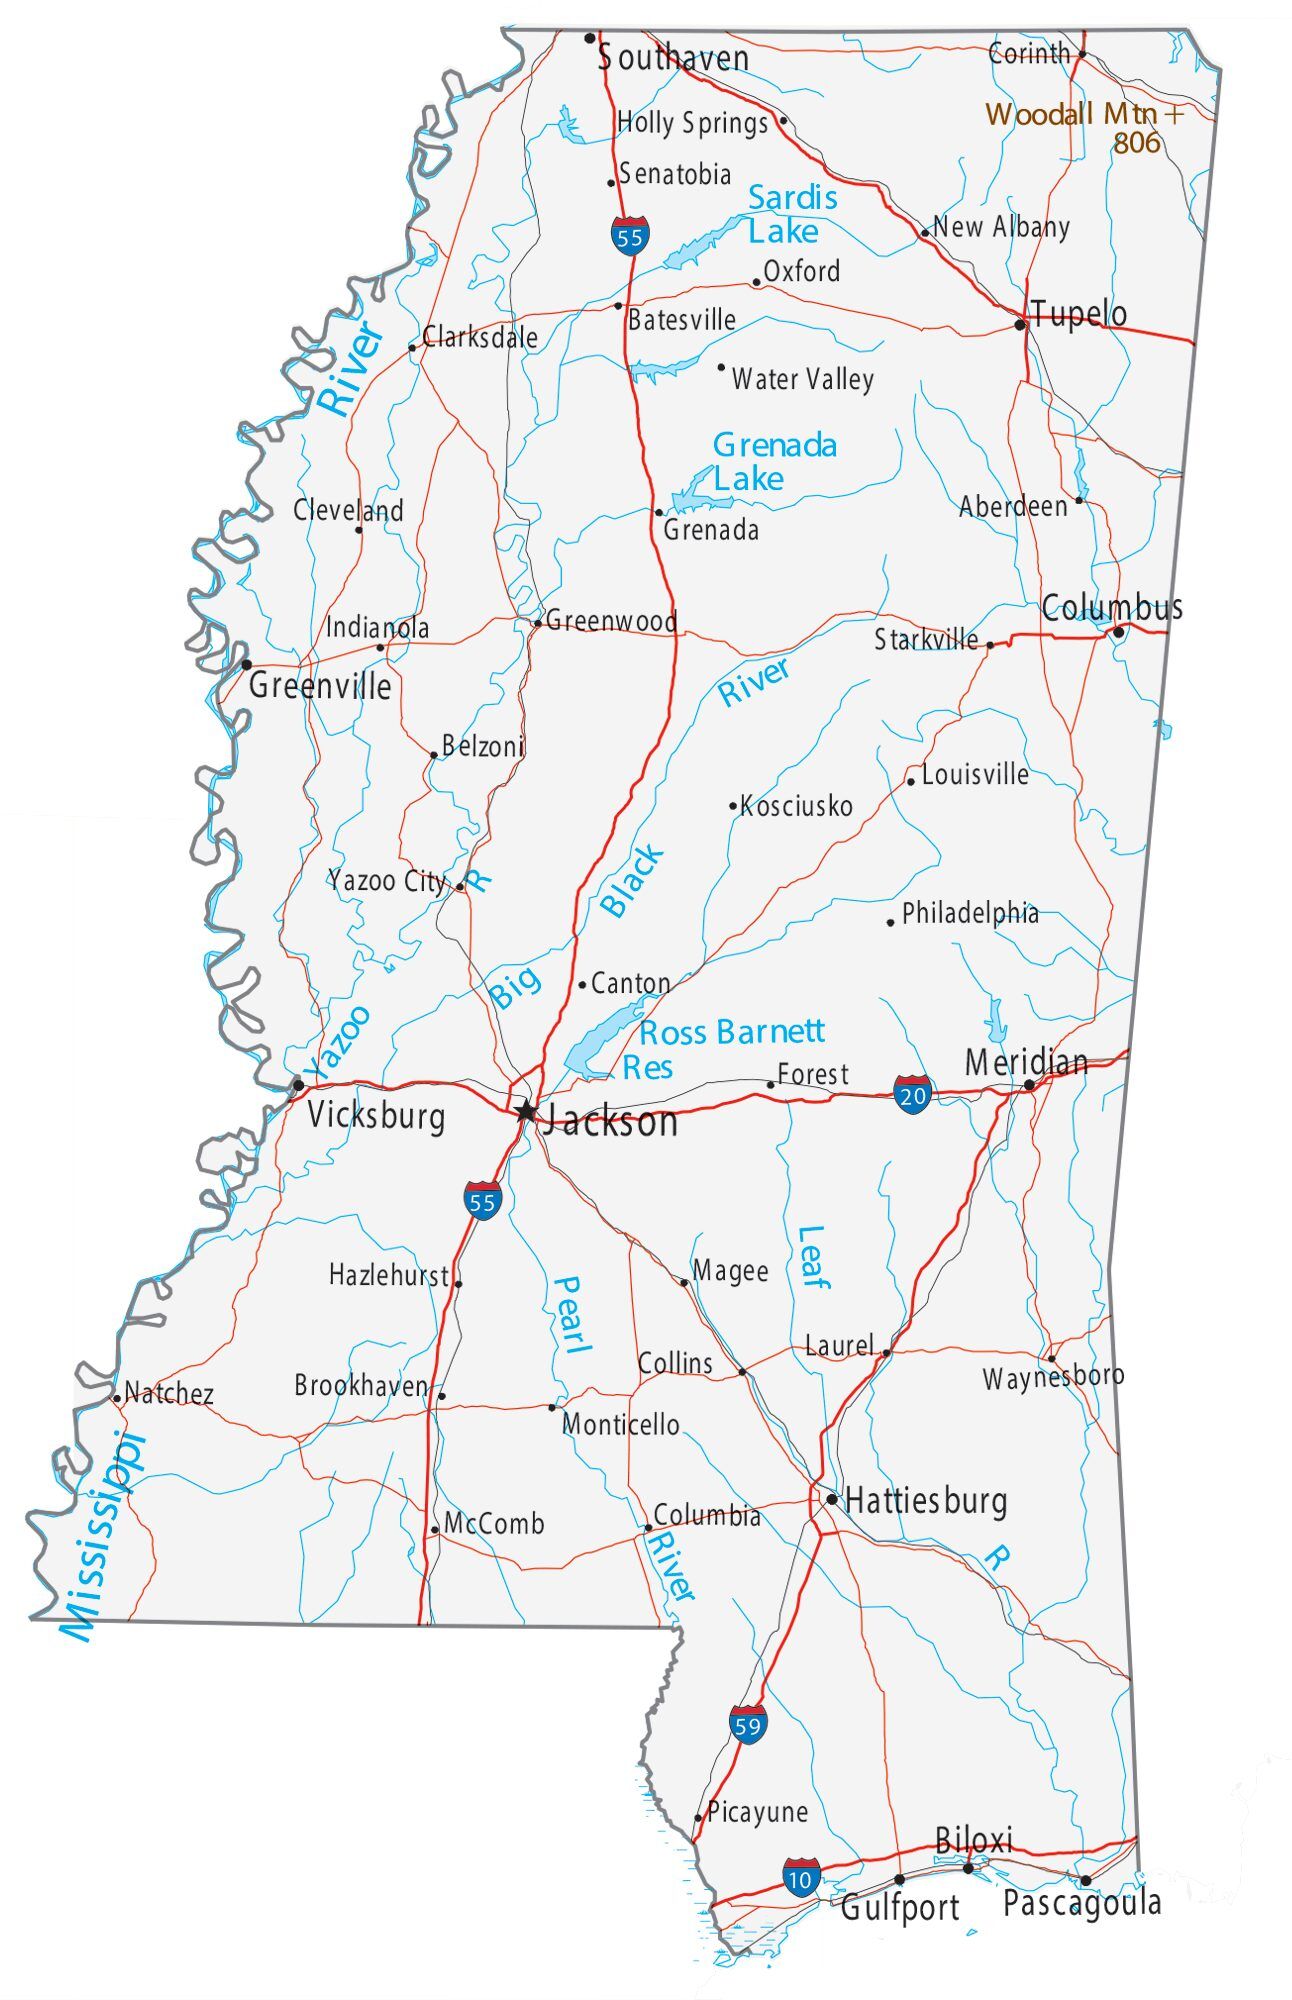 Map of Mississippi - Cities and Roads - GIS Geography